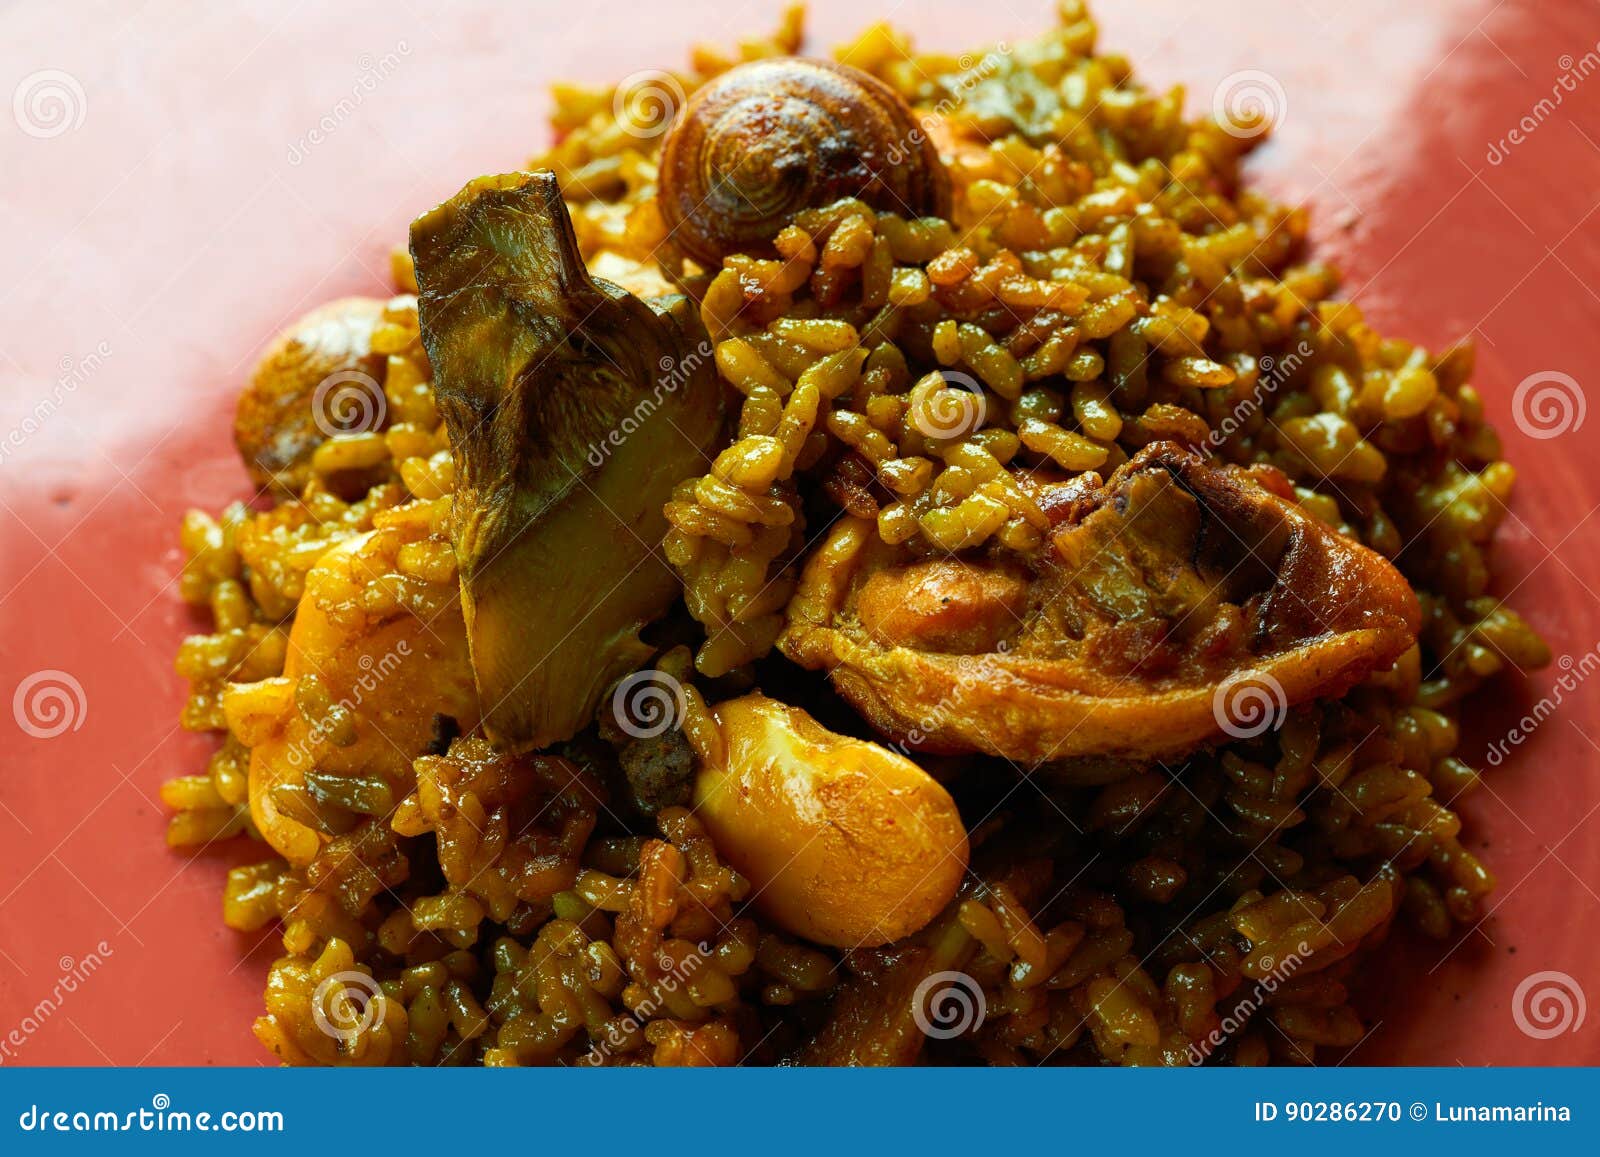 valencian paella with chicken and rabbit